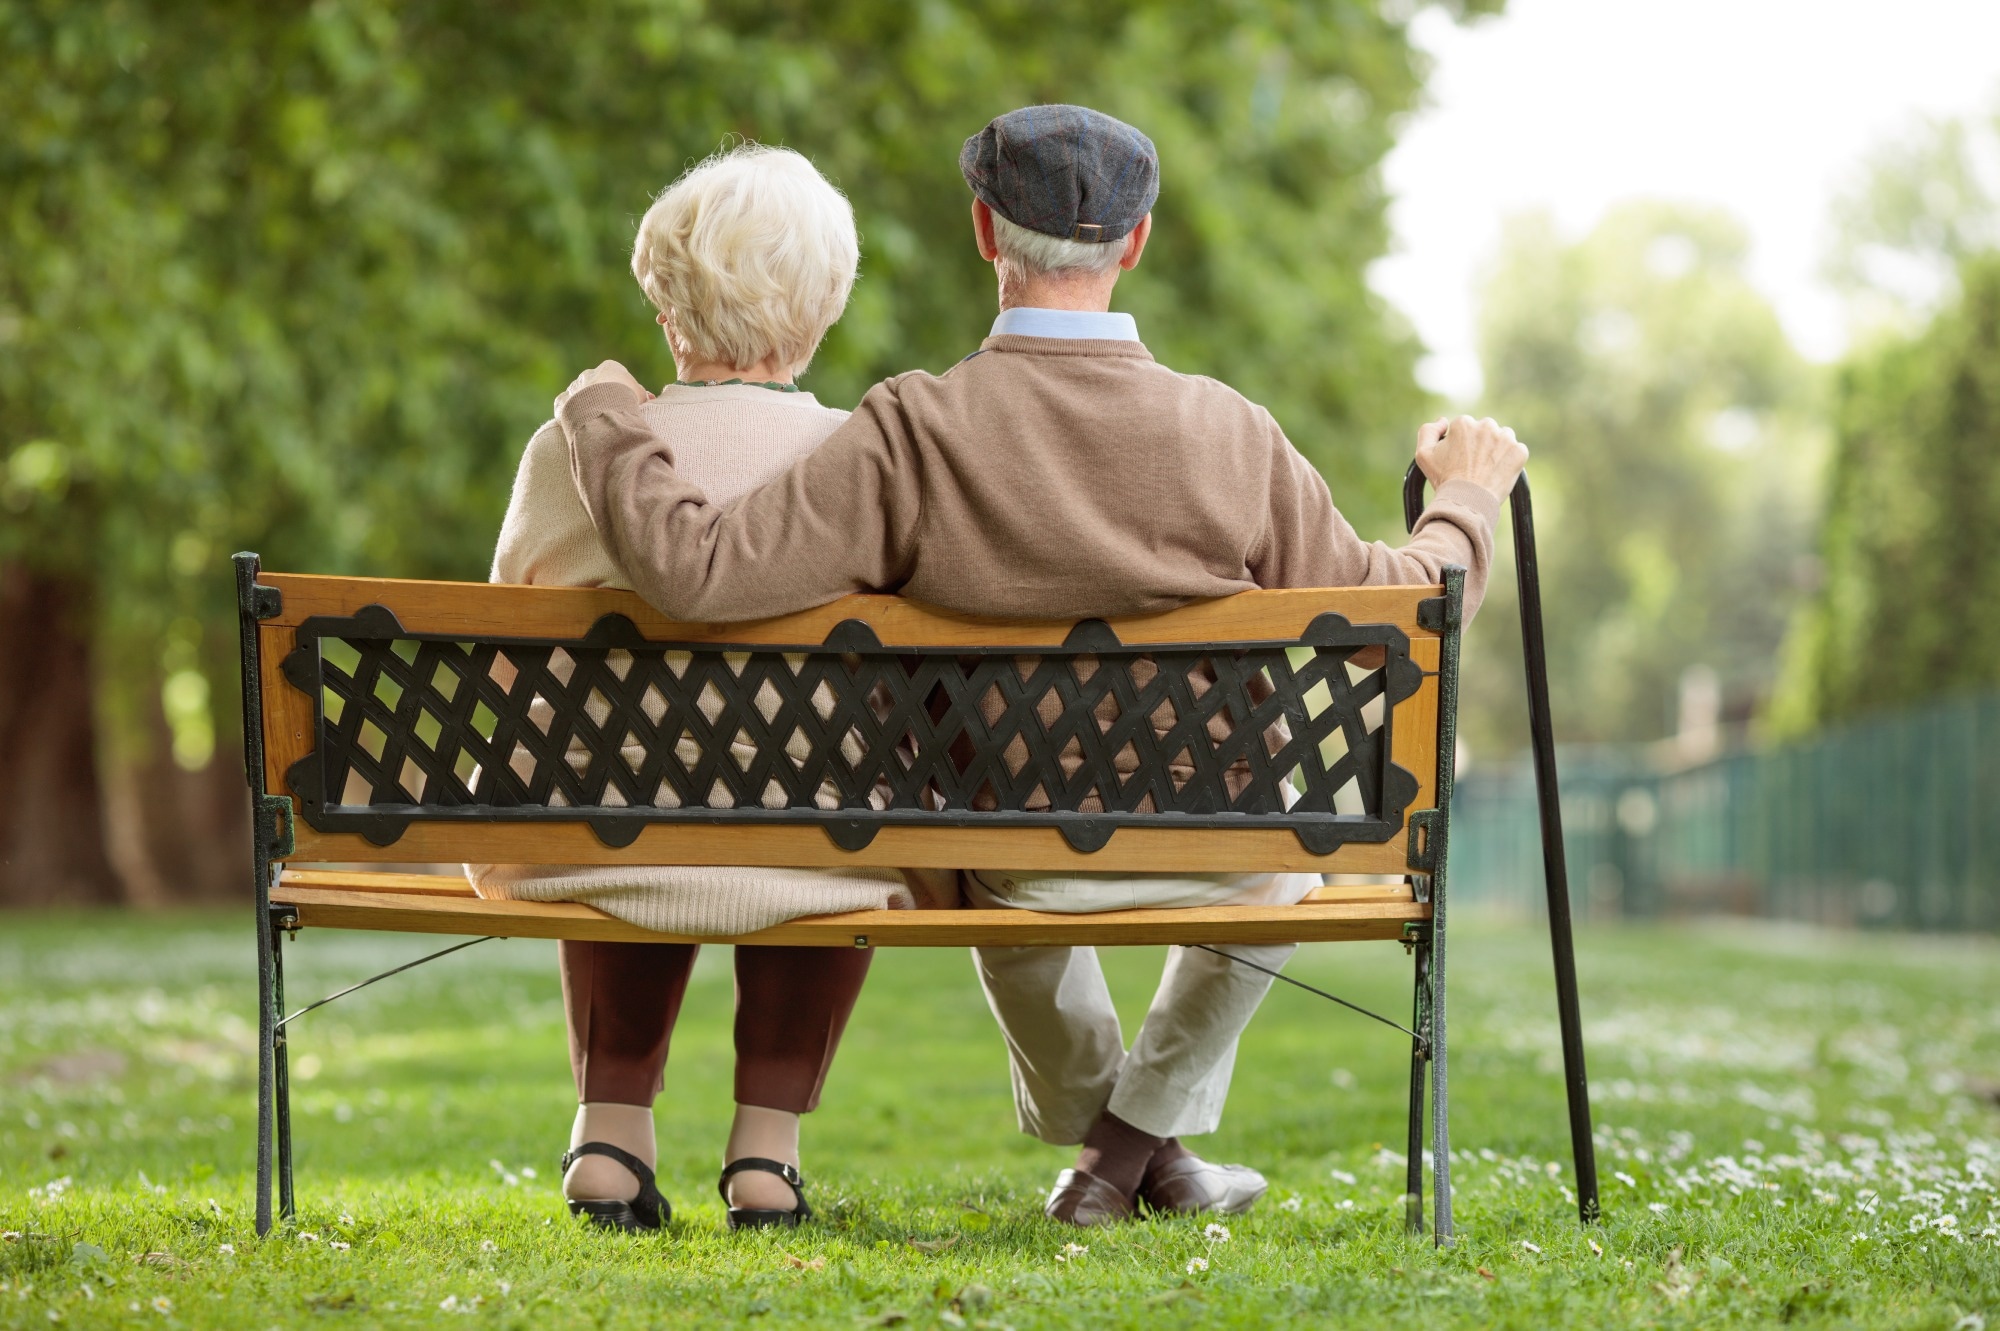 Study: Projection of temperature-related mortality among the elderly under advanced aging and climate change scenario. Image Credit: Ljupco Smokovski / Shutterstock.com